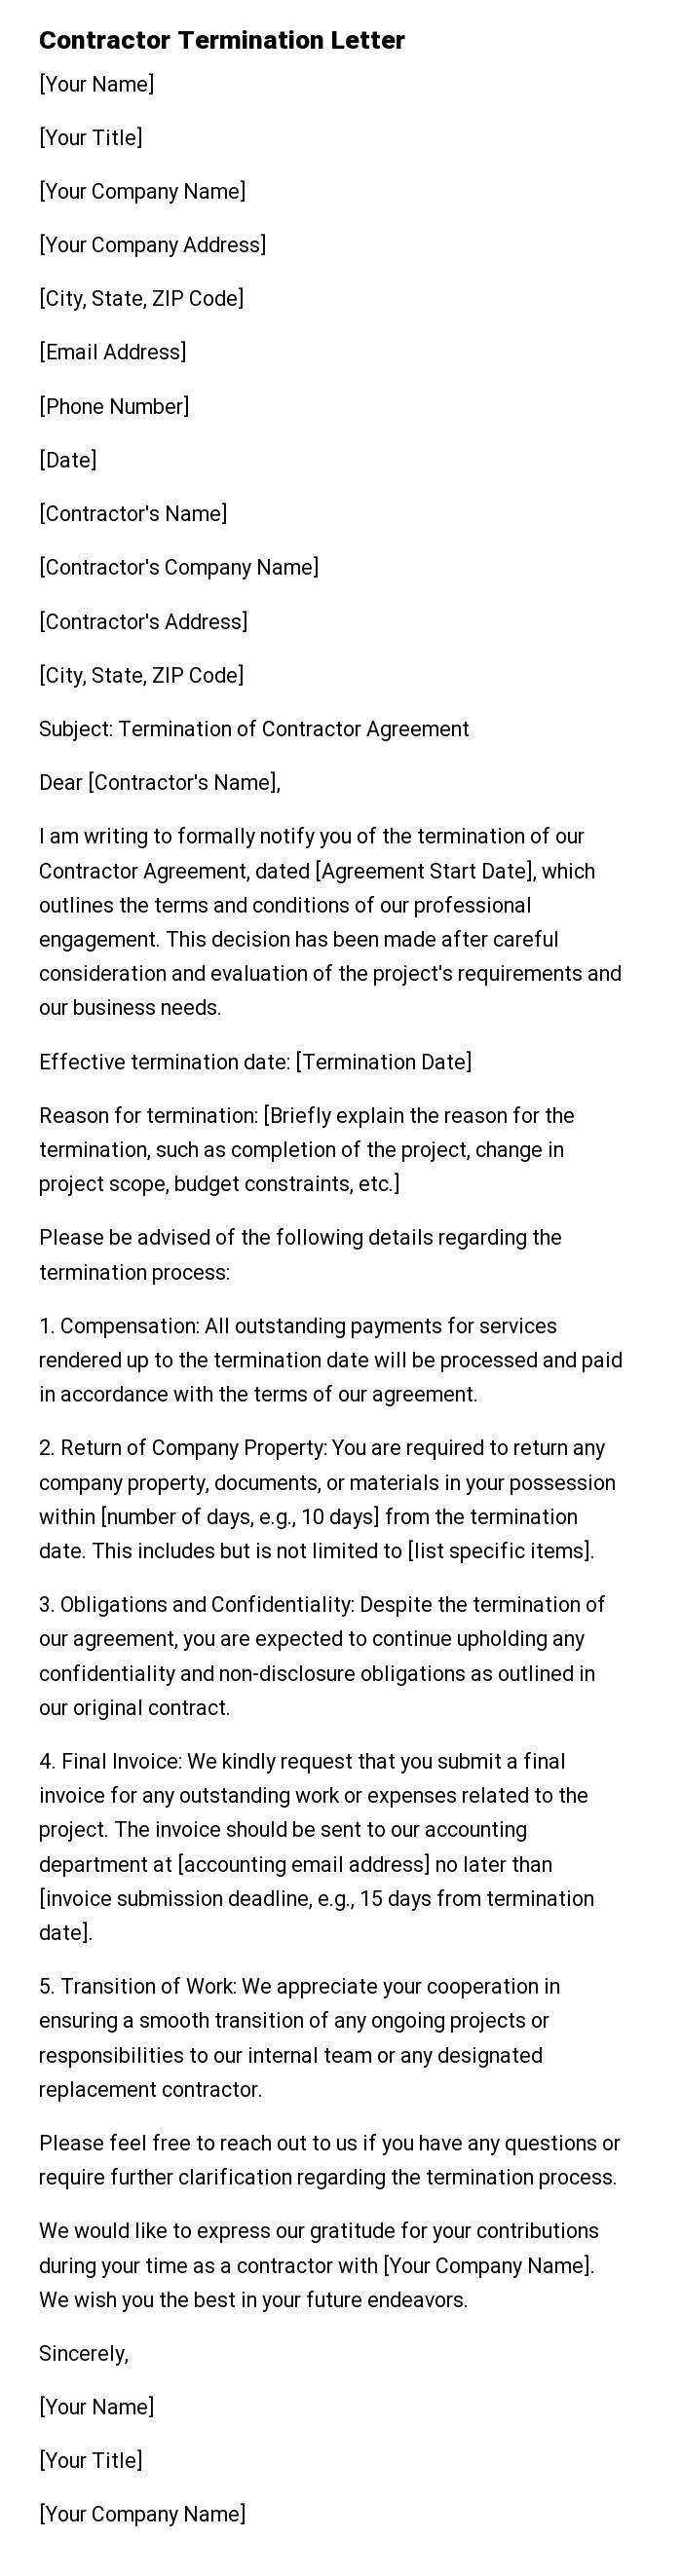 Contractor Termination Letter